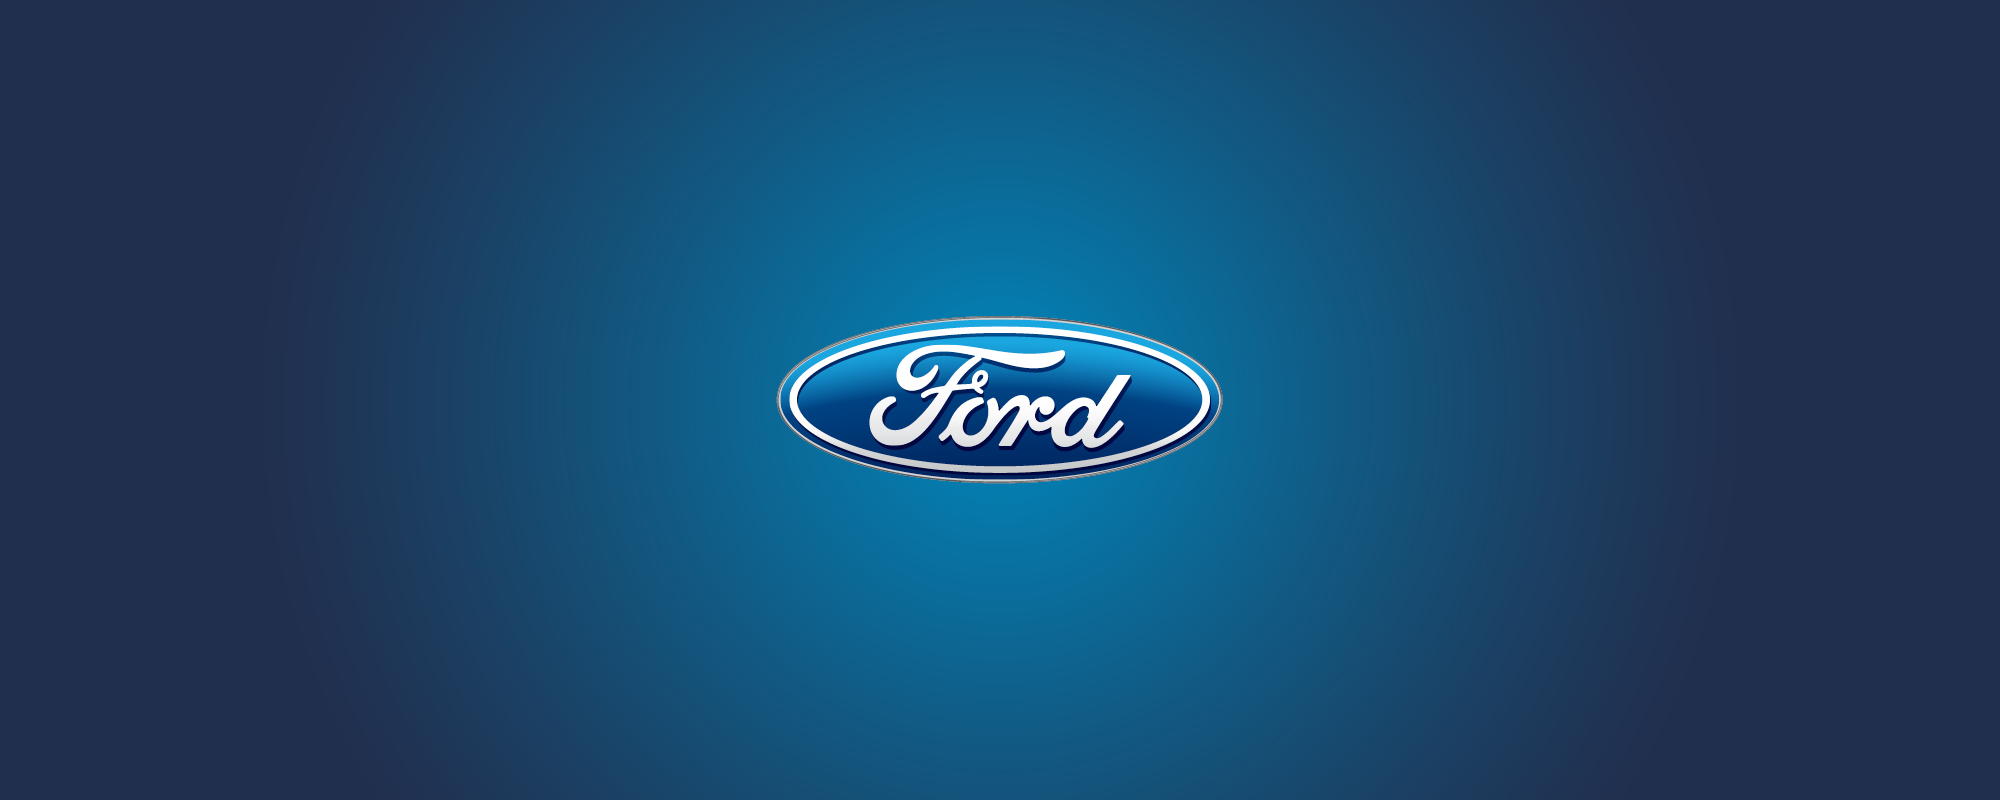 Ford Cover Image.jpg